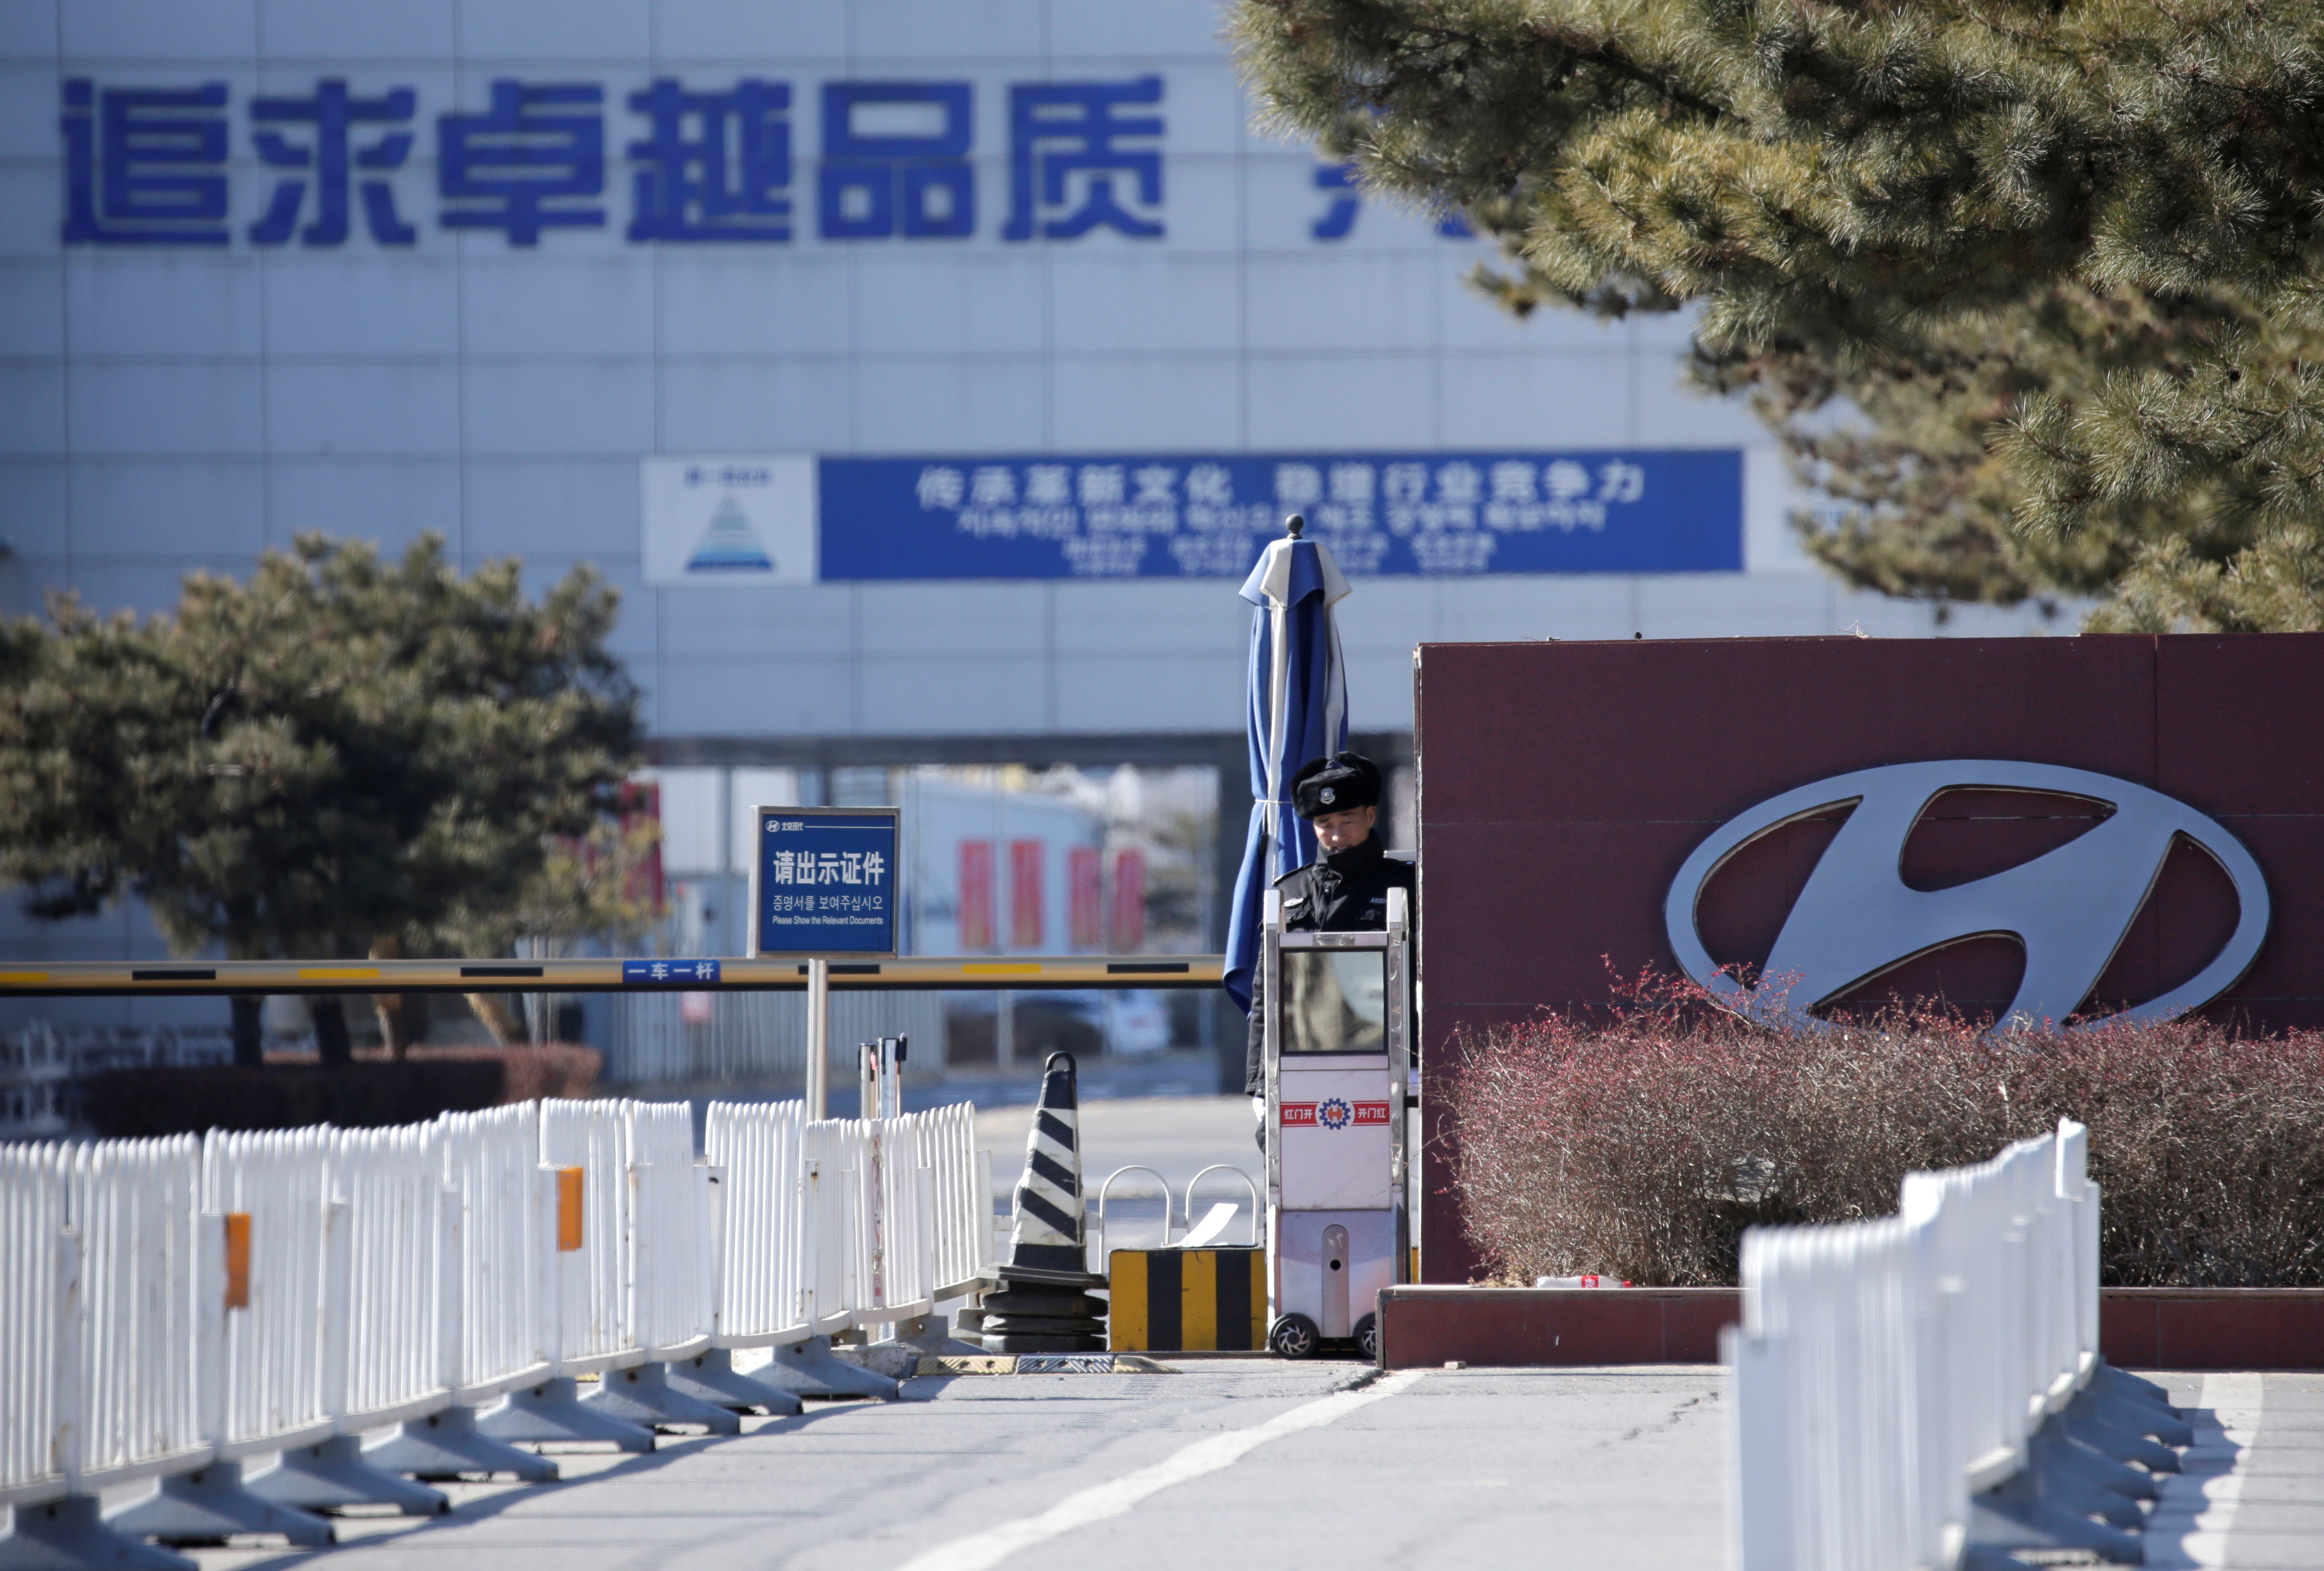 A security guard is seen at the main entrance of a plant of Hyundai Motor Co on the outskirts of Beijing